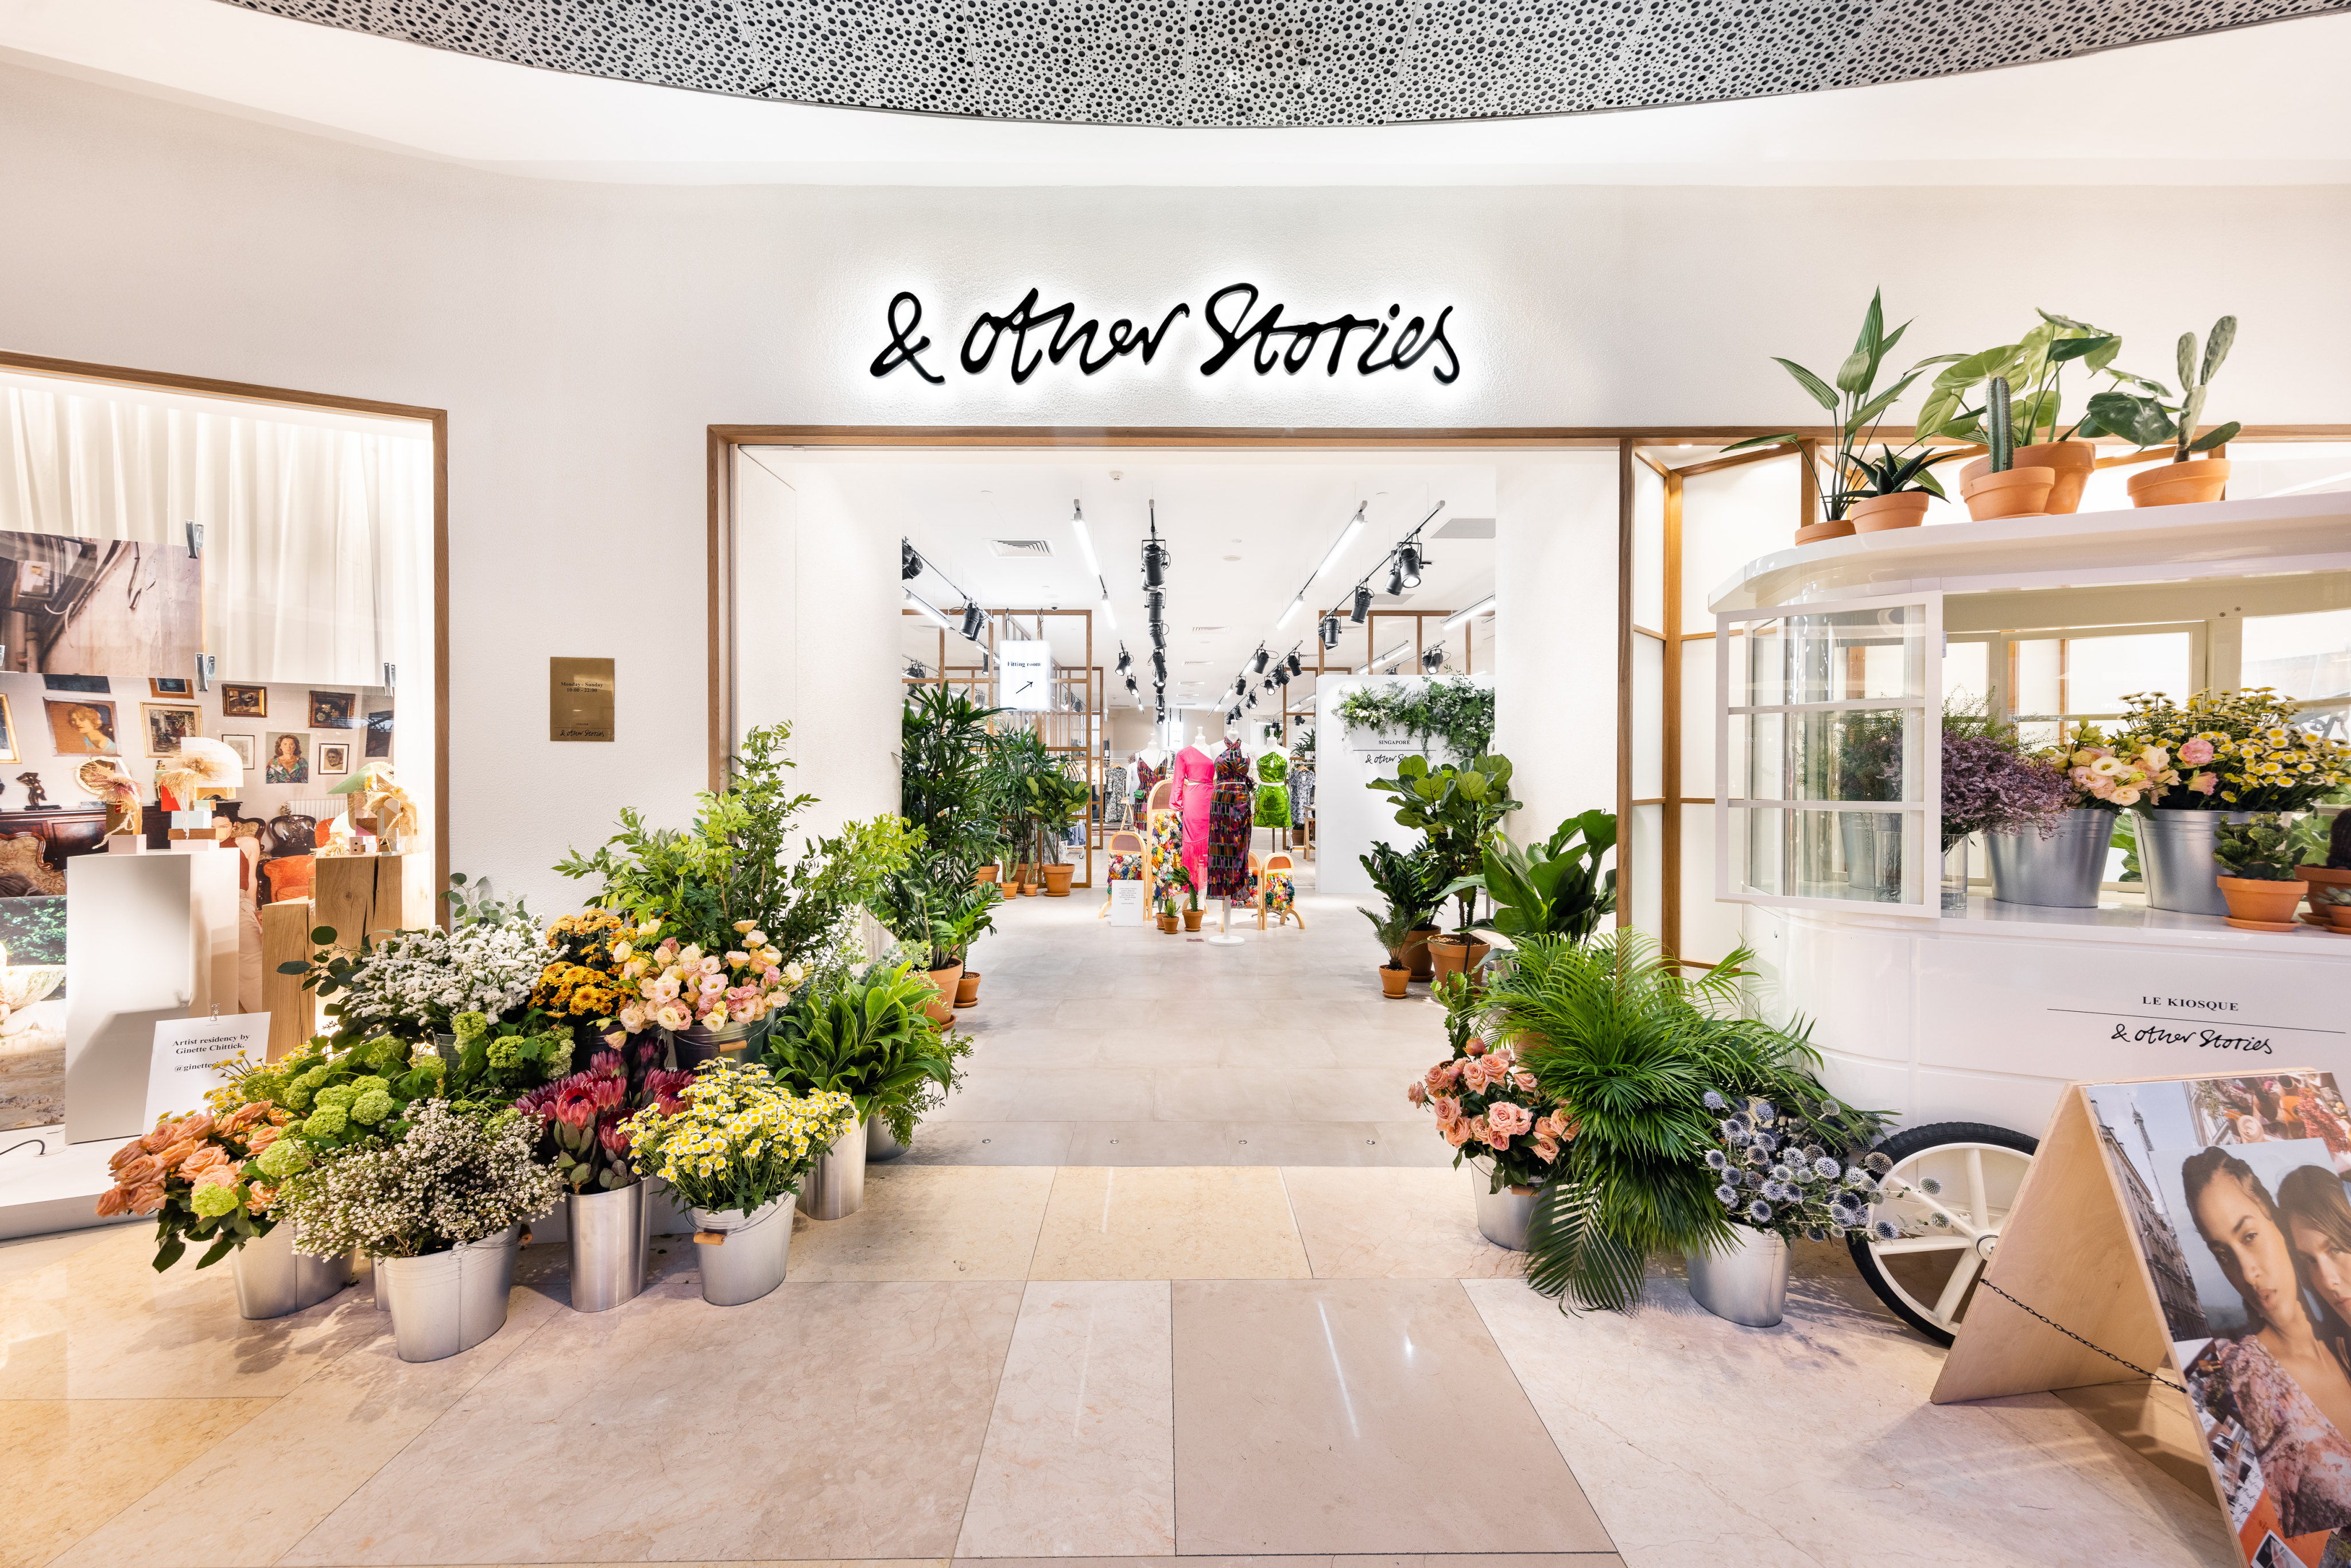 & Other Stories recently opened a fashion and lifestyle store in Singapore, its first in Southeast Asia. The brand, part of H & M Group, has a focus on sustainability.